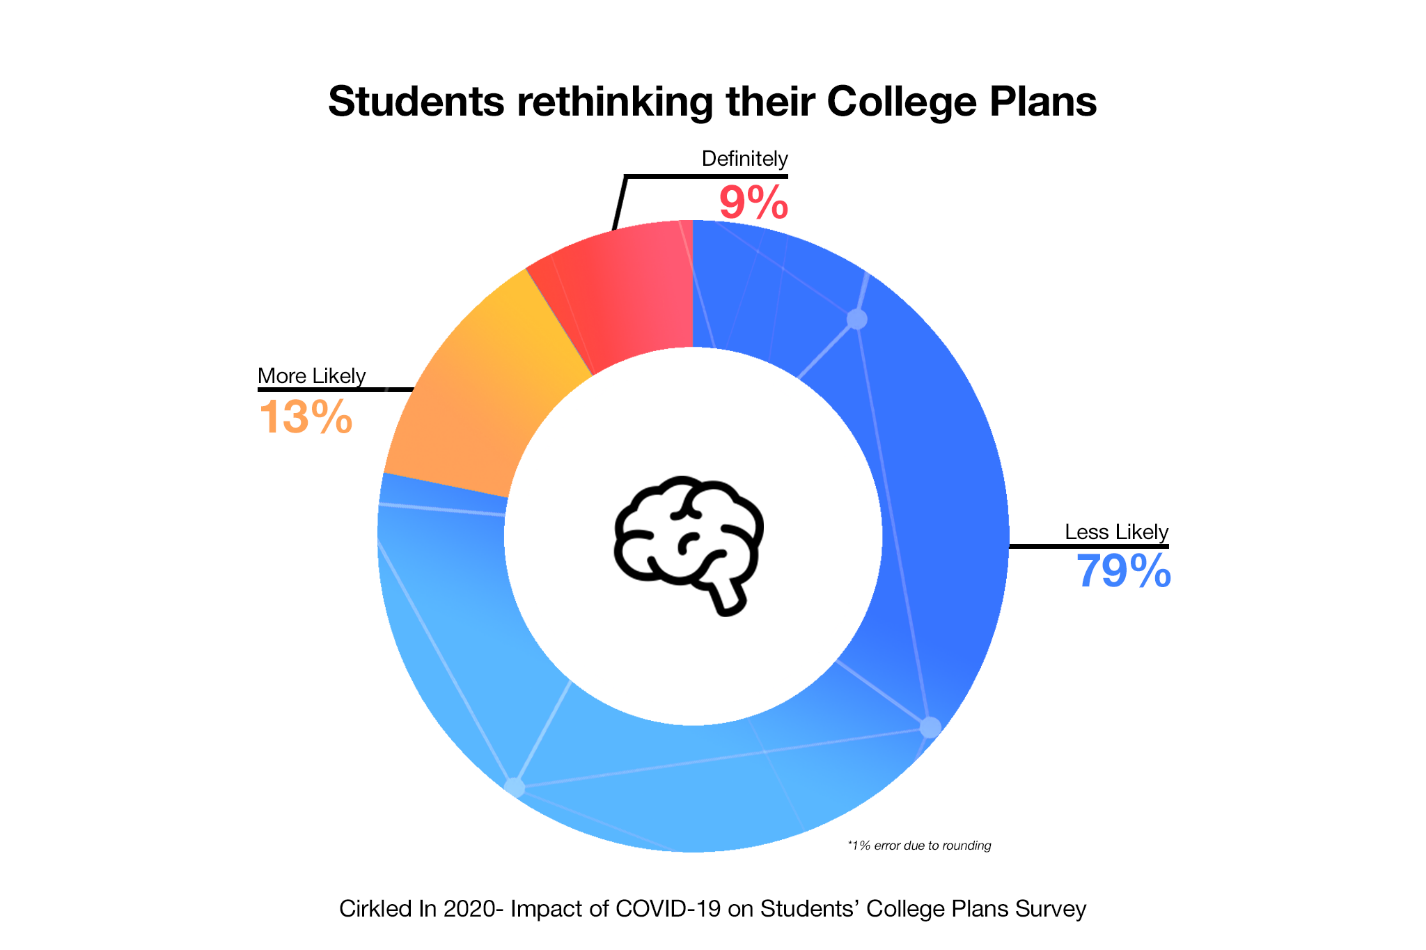 Post COVID - 22% high school students rethinking their college plan